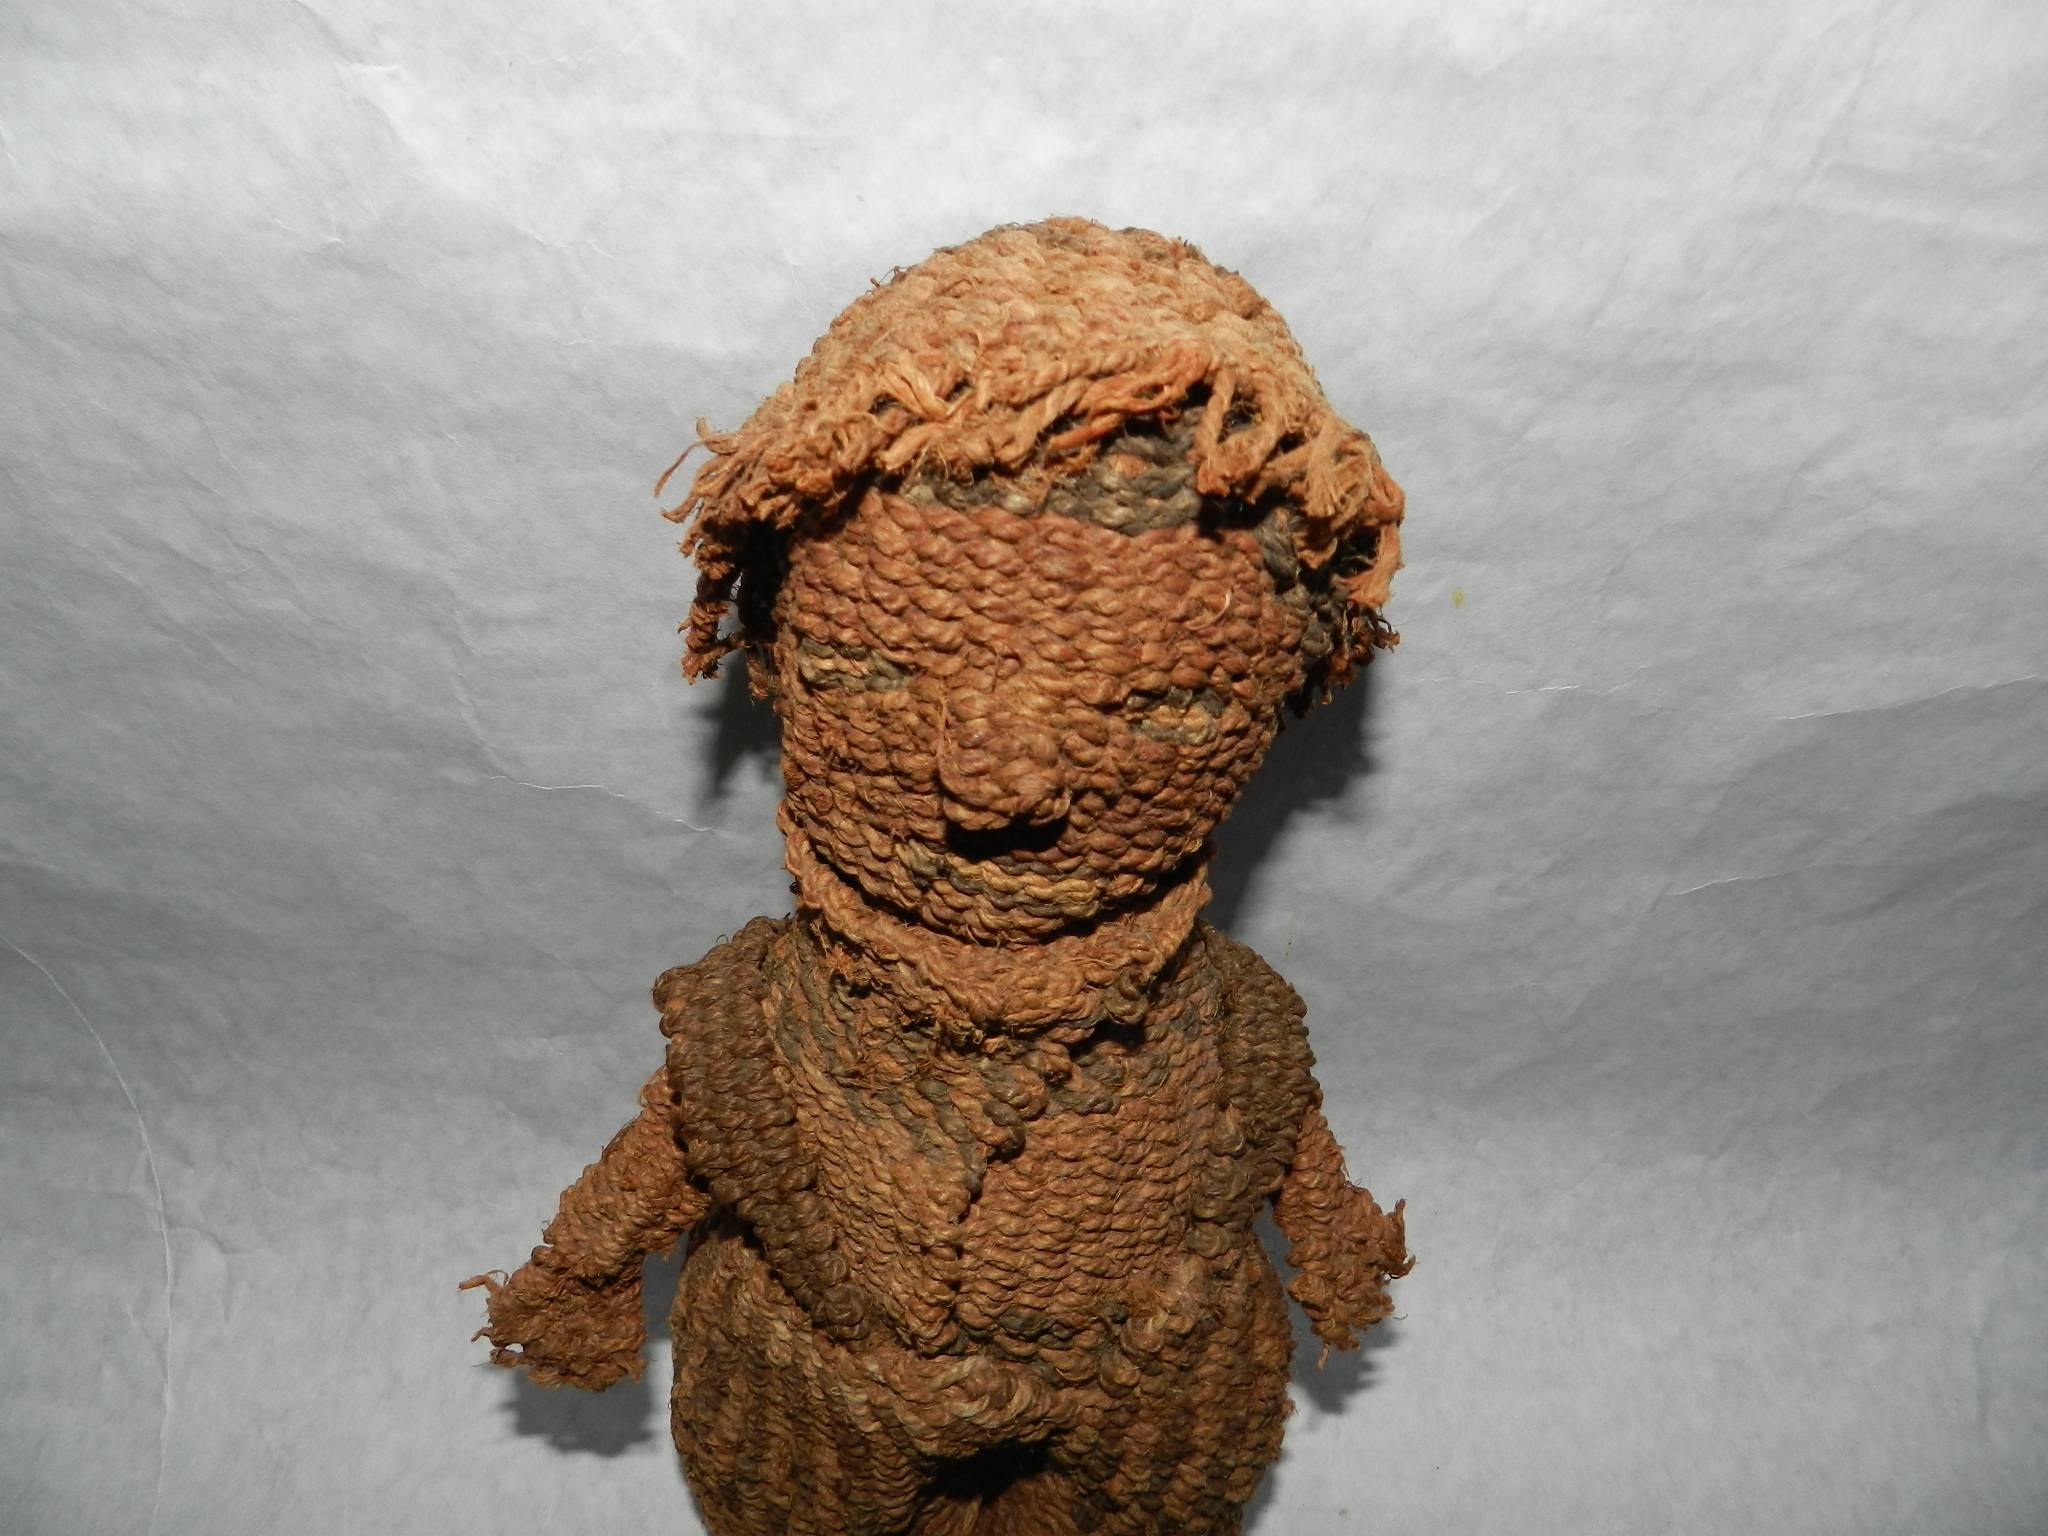 This handmade basketry doll is from the Northern California Klamath tribe.